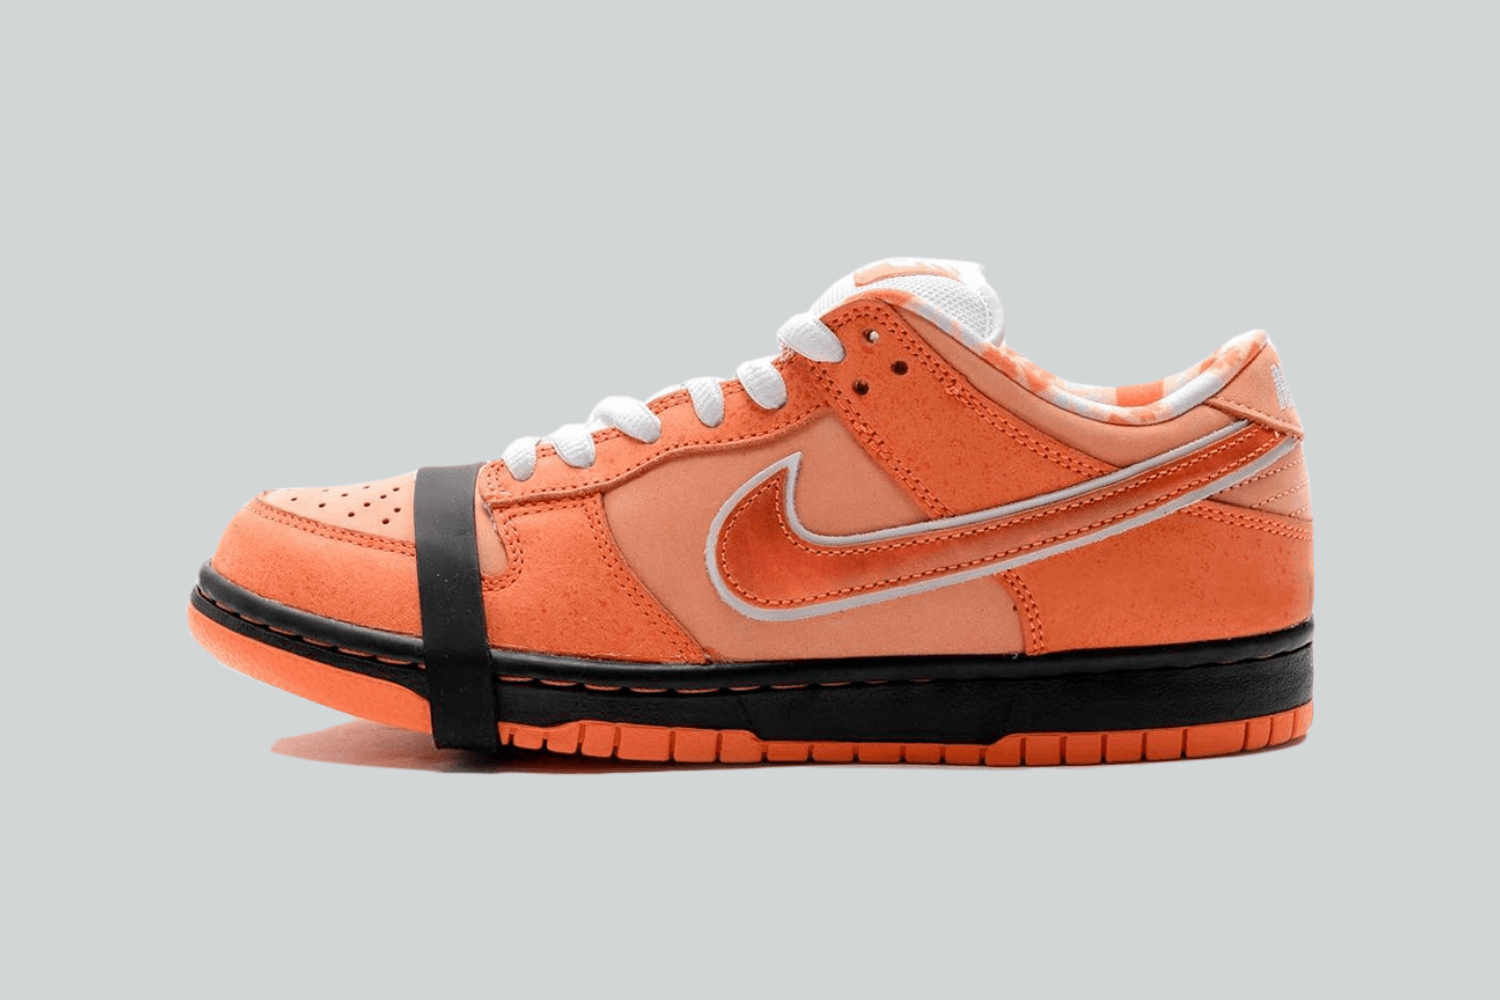 Official images Concepts x Nike SB Dunk Low 'Orange Lobster'